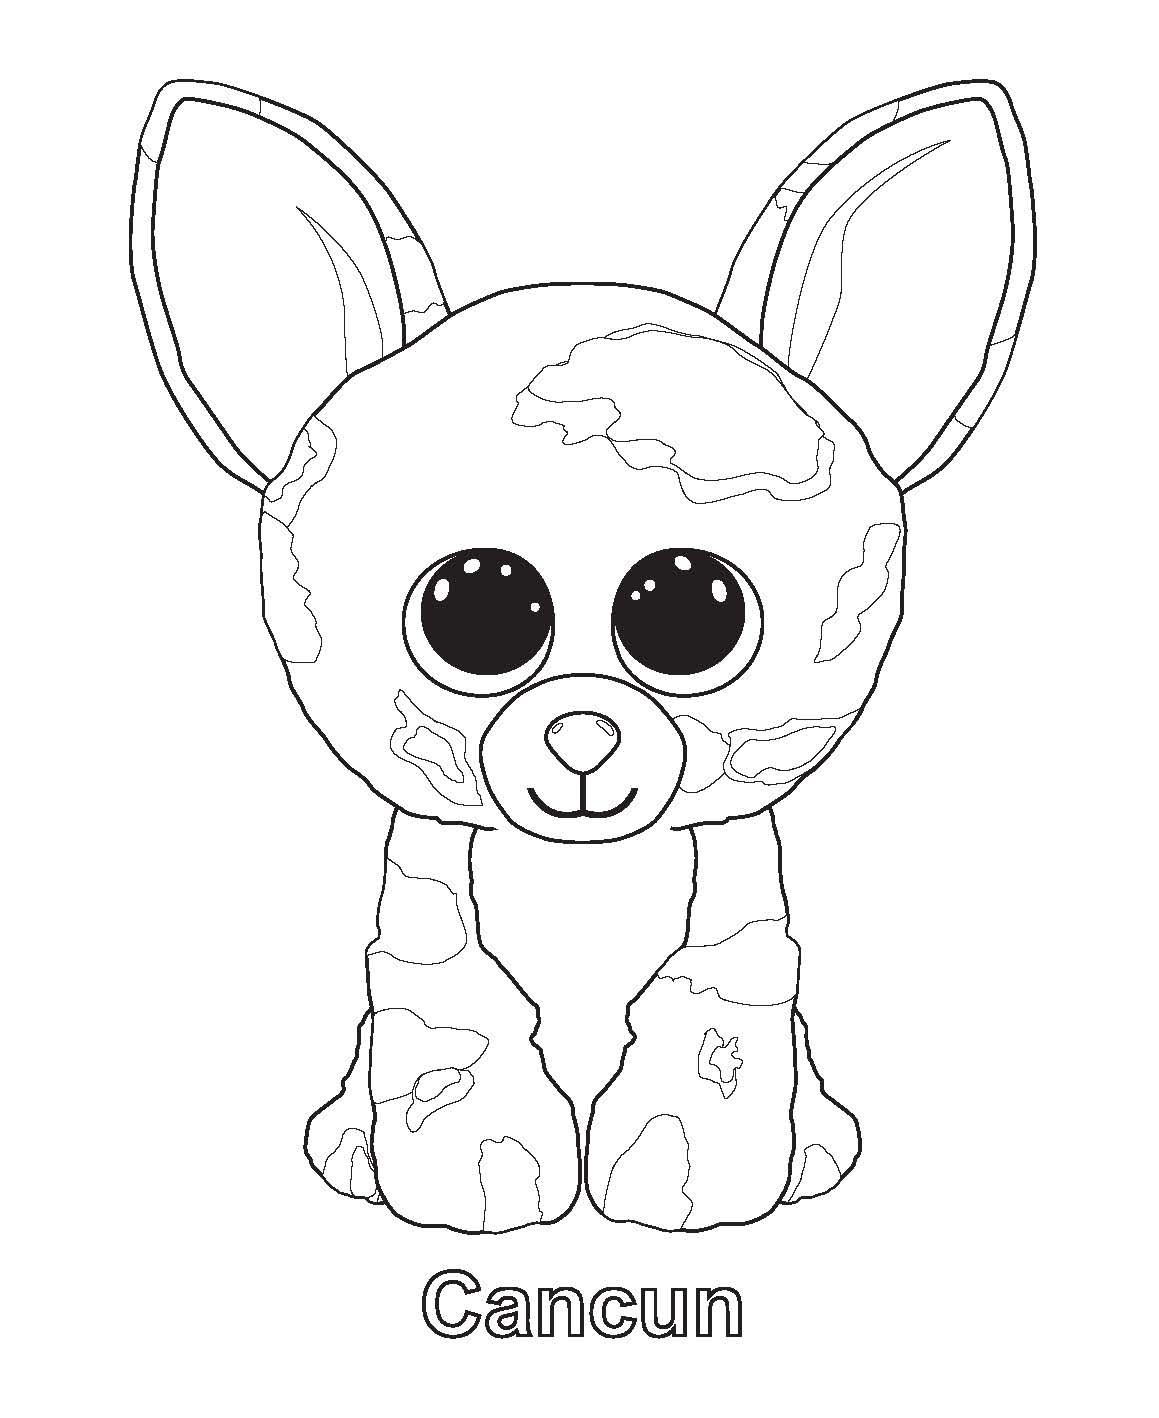 Coloring Ideas : Beanie Boo Coloring Pages Only Staggering Photo - Free Printable Beanie Boo Coloring Pages